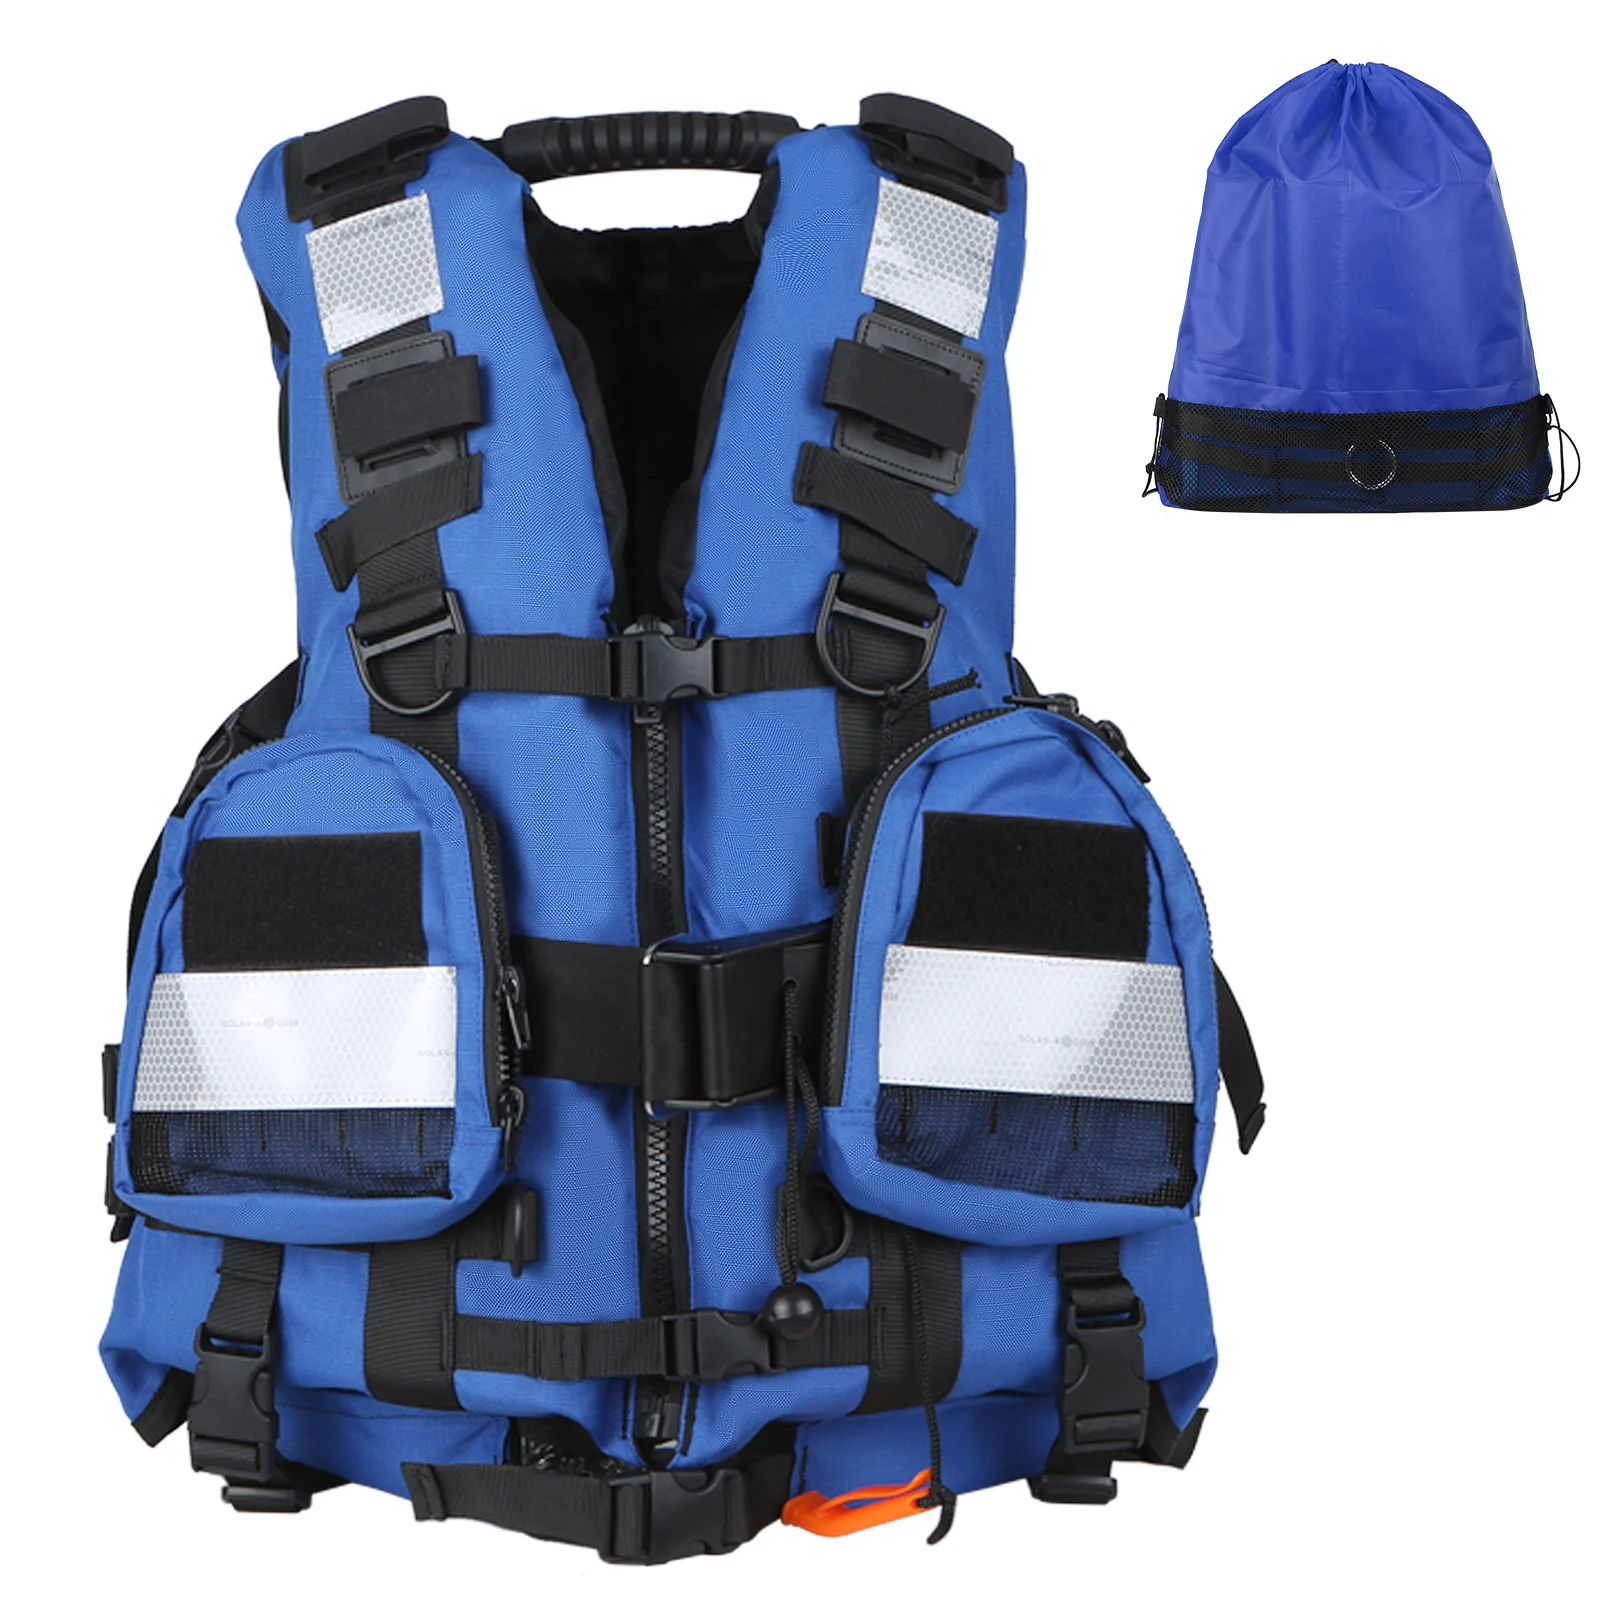 

Personal Flotation Device Adults Life Jacket Vest Safety Float Suit for Water Sports Kayaking Fishing Surfing Survival Jacket